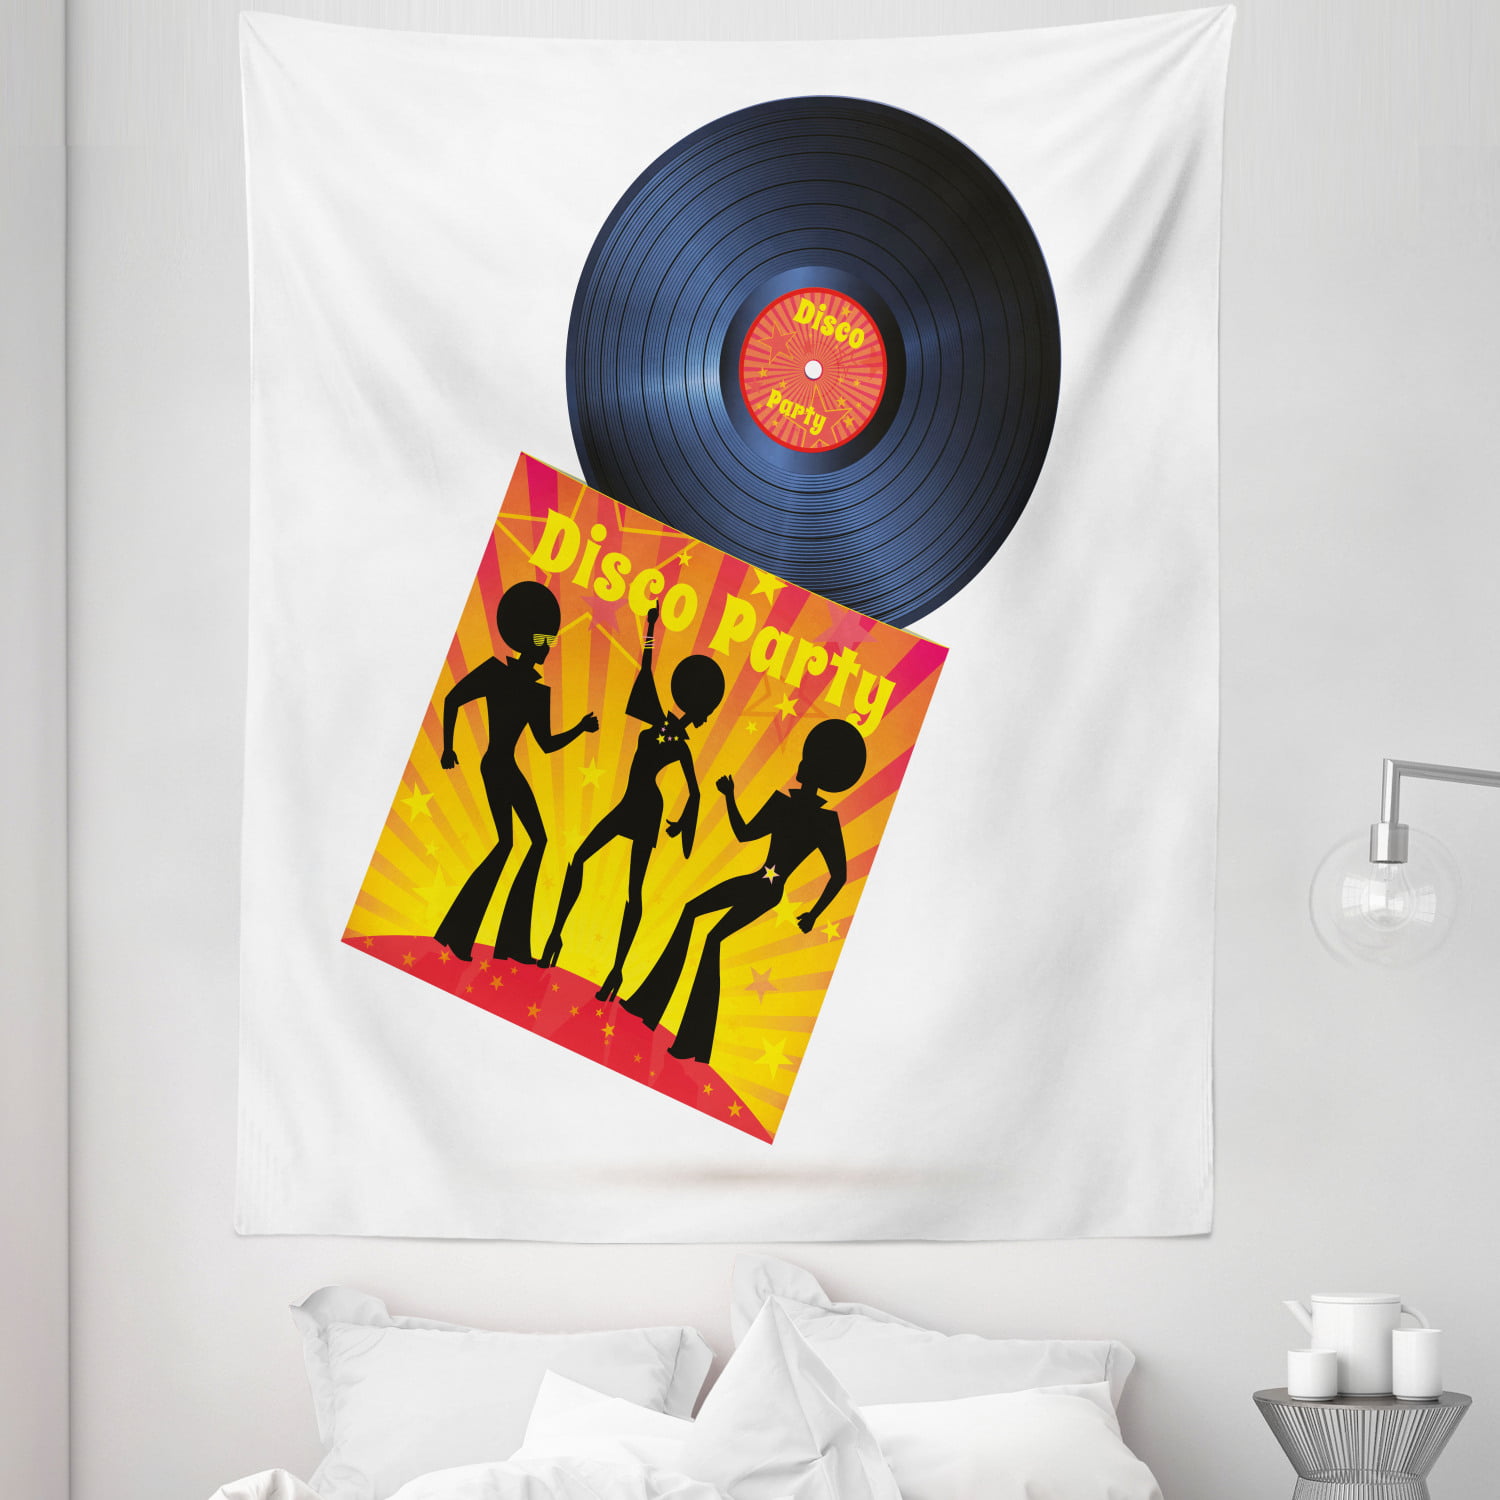 Vinyl Tapestry, Vinyl Record with Disco Party Illustration Dancers Music Art Print, Fabric Wall Hanging Decor for Bedroom Living Room Dorm, 5 Sizes, Orange Yellow White, by Ambesonne - Walmart.com